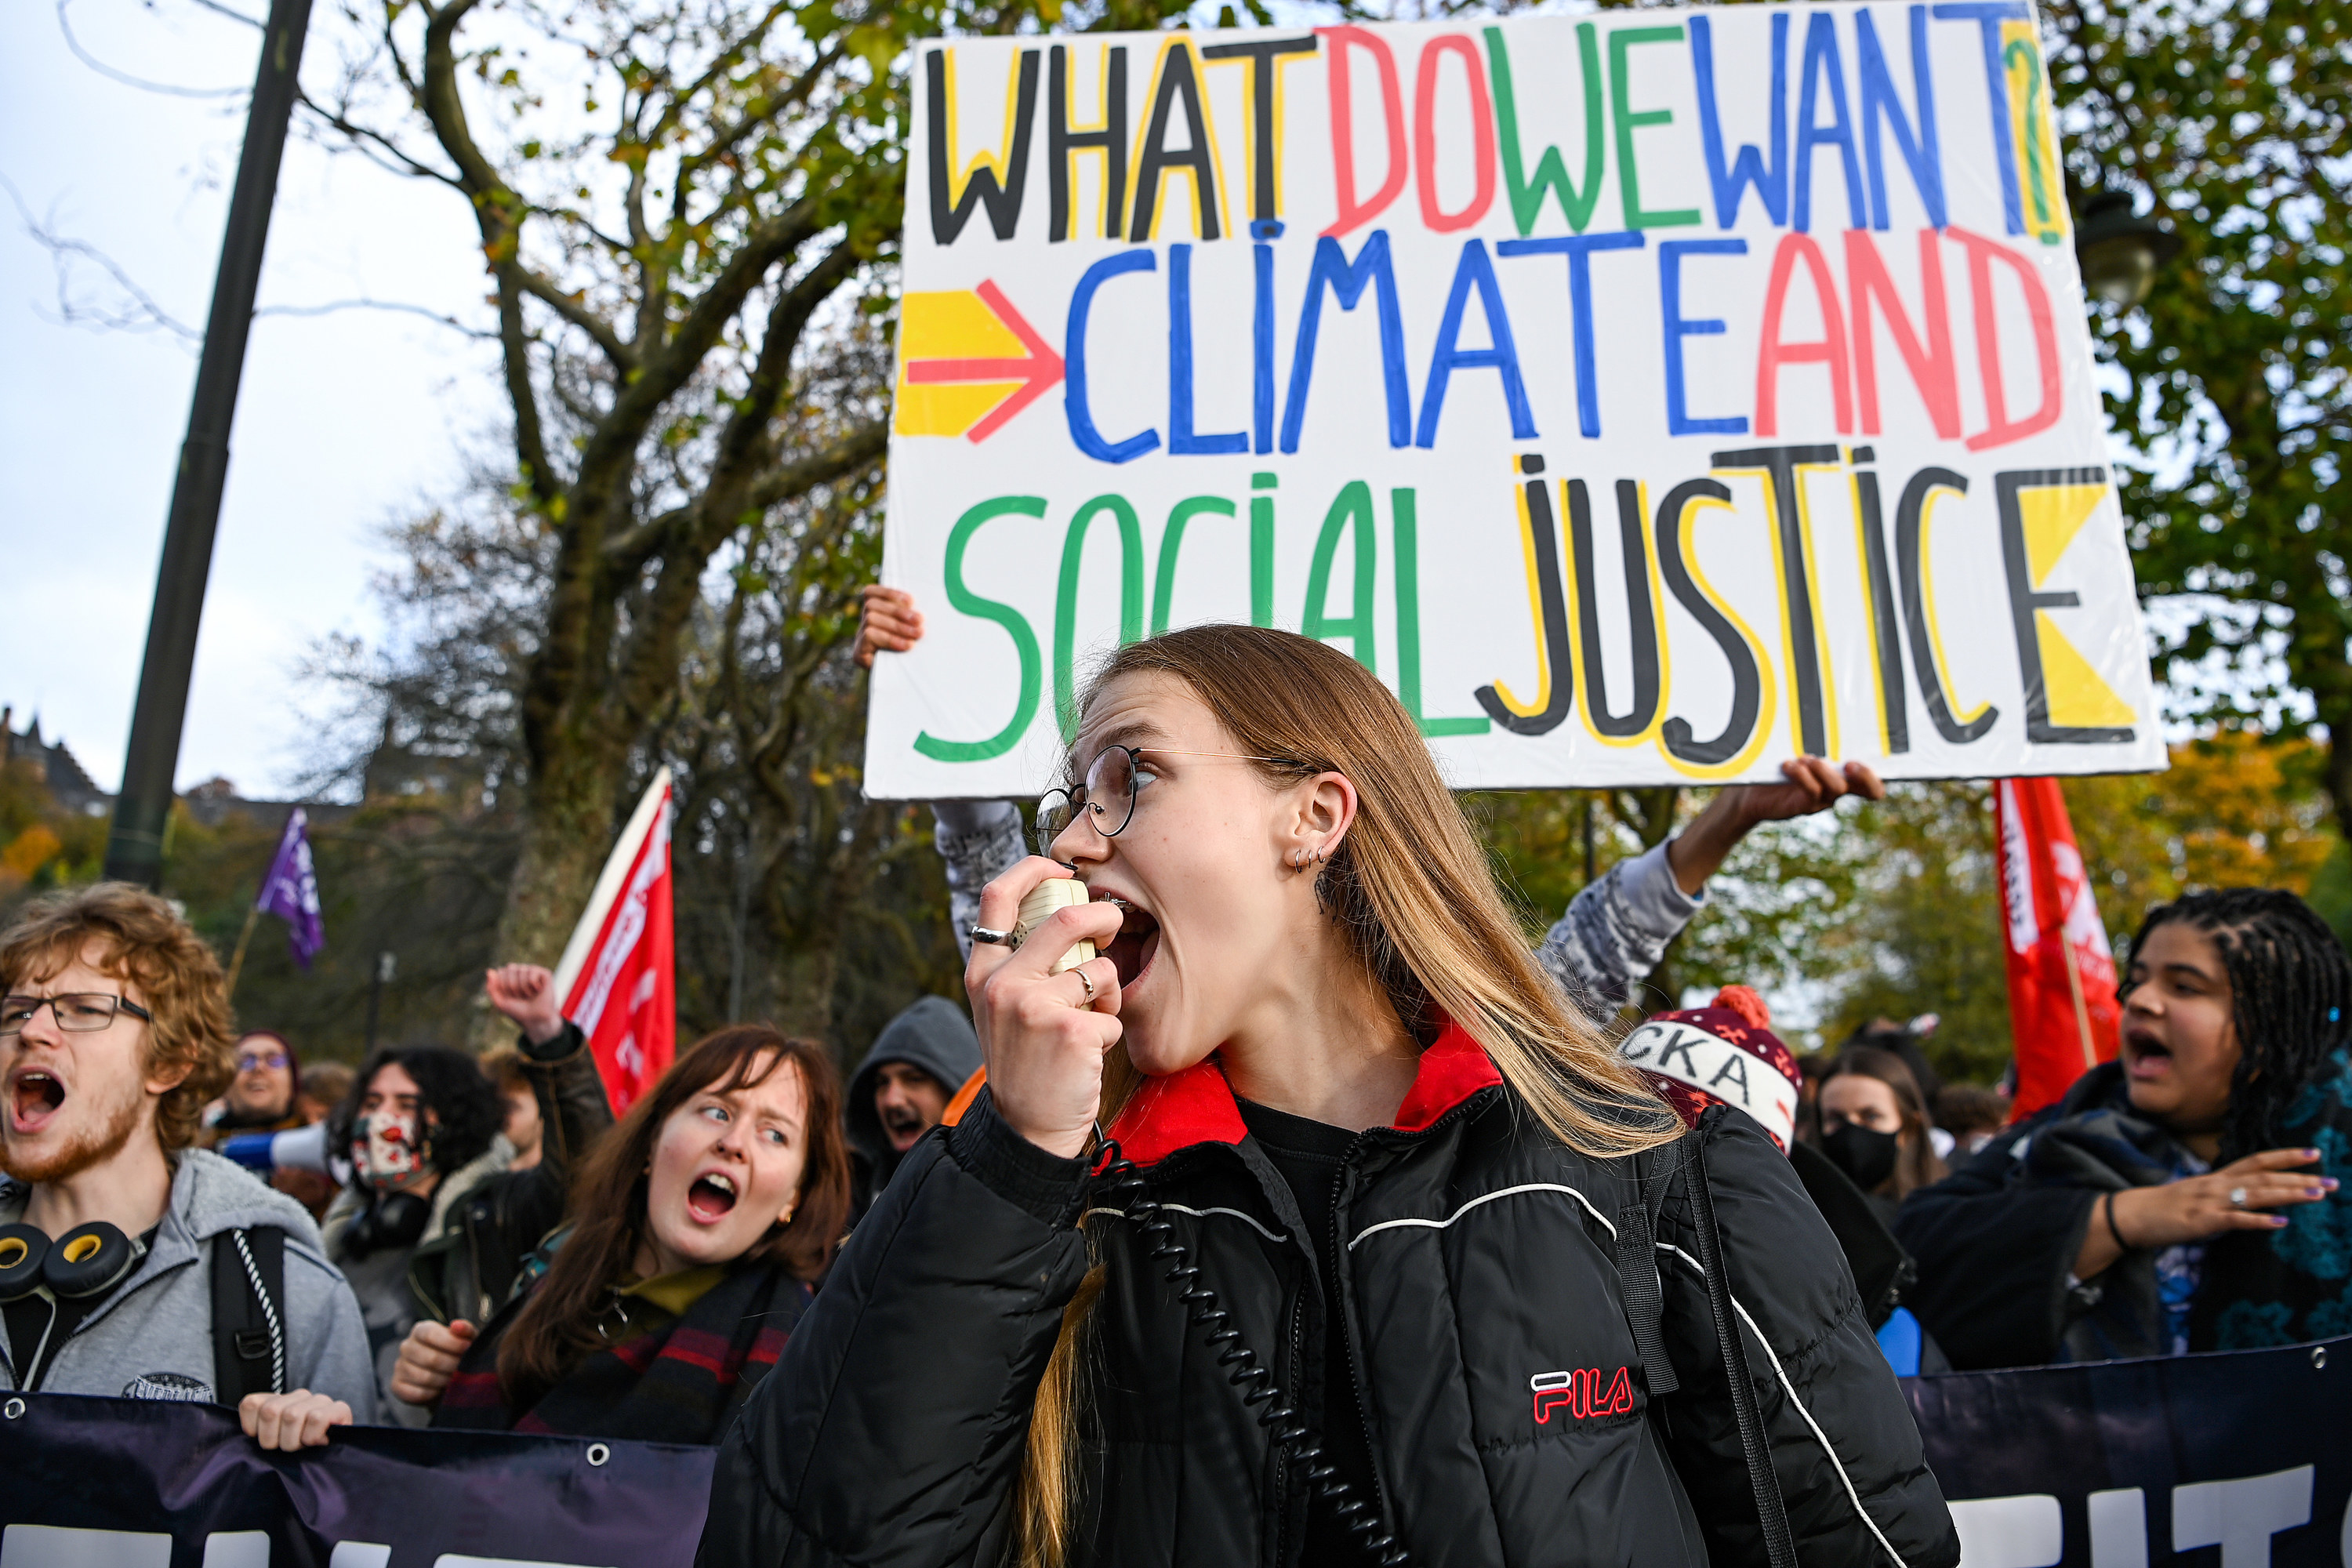 A young protester shouts into a megaphone in front of a sign that reads &quot;What do we want? Climate and social justice&quot;